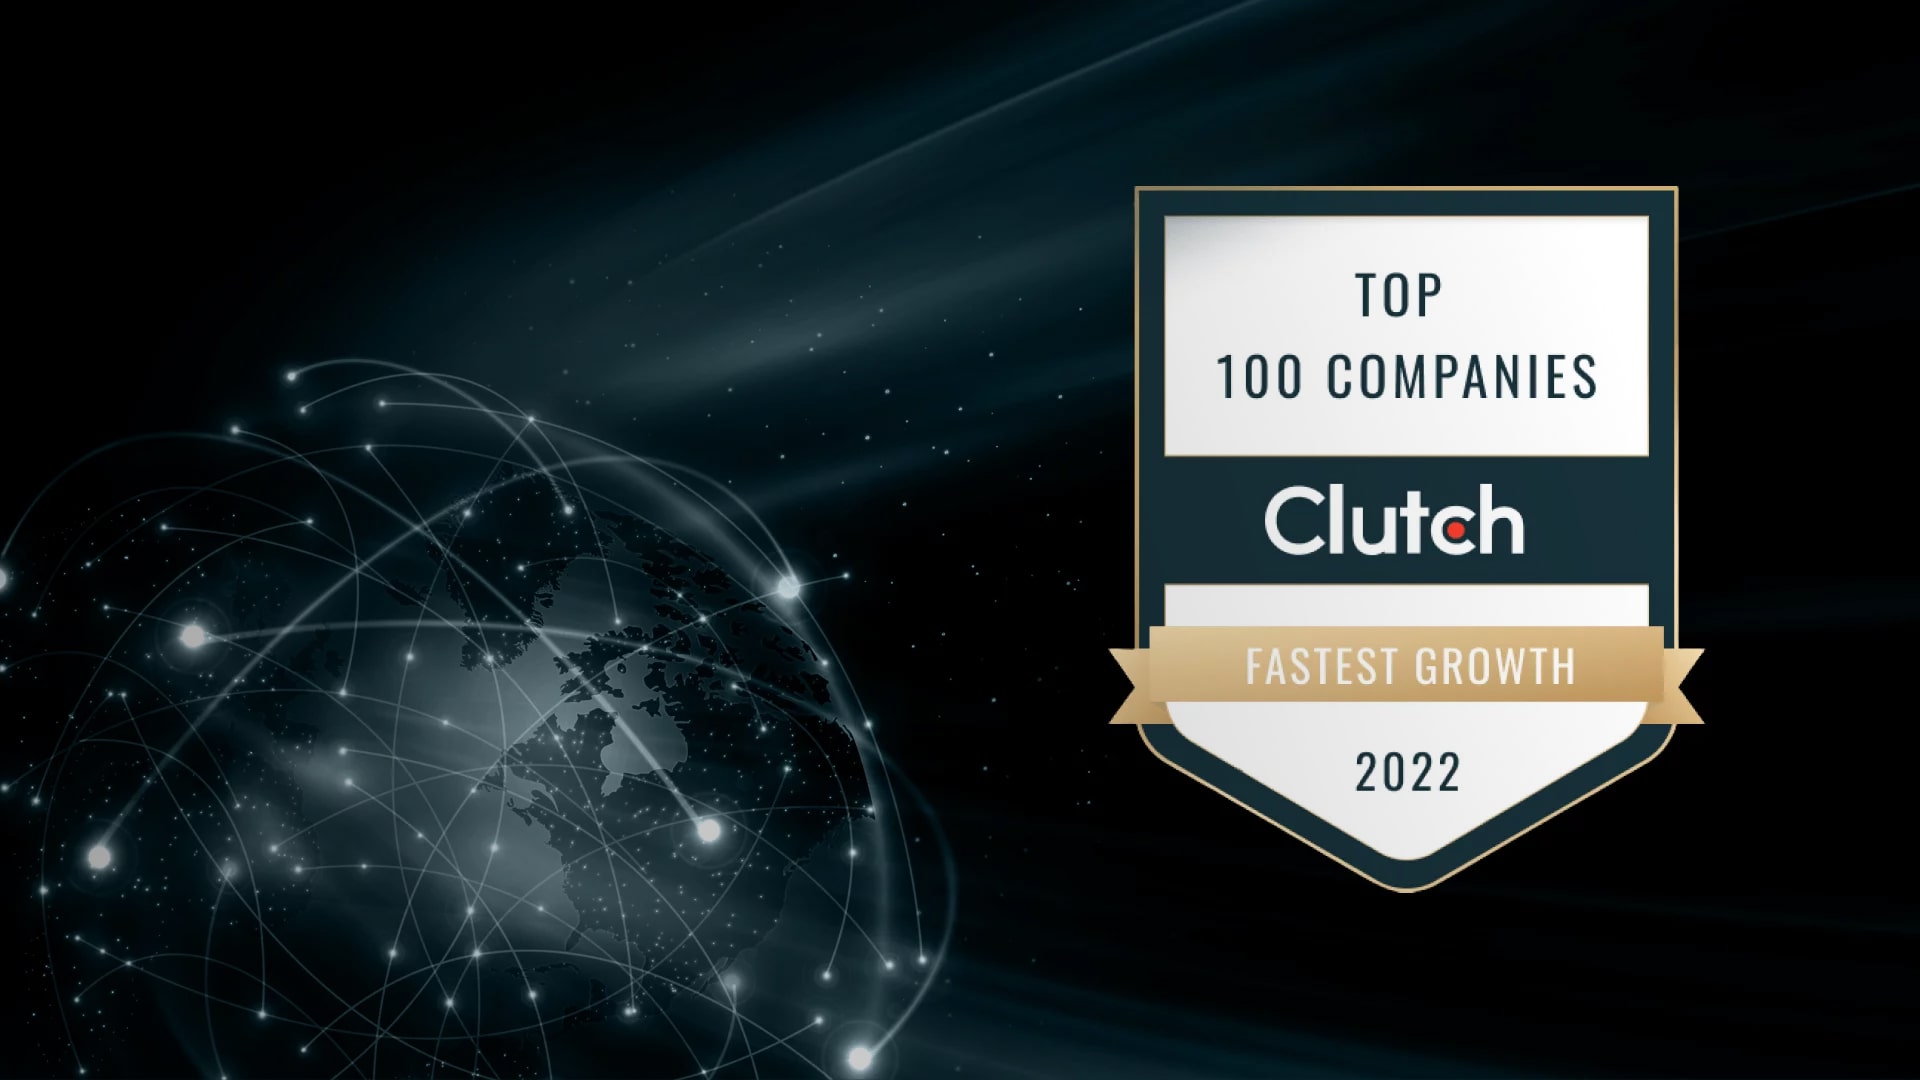 Tremend enters for the 2nd consecutive year in Clutch’s Top 100 of the Fastest-Growing Companies